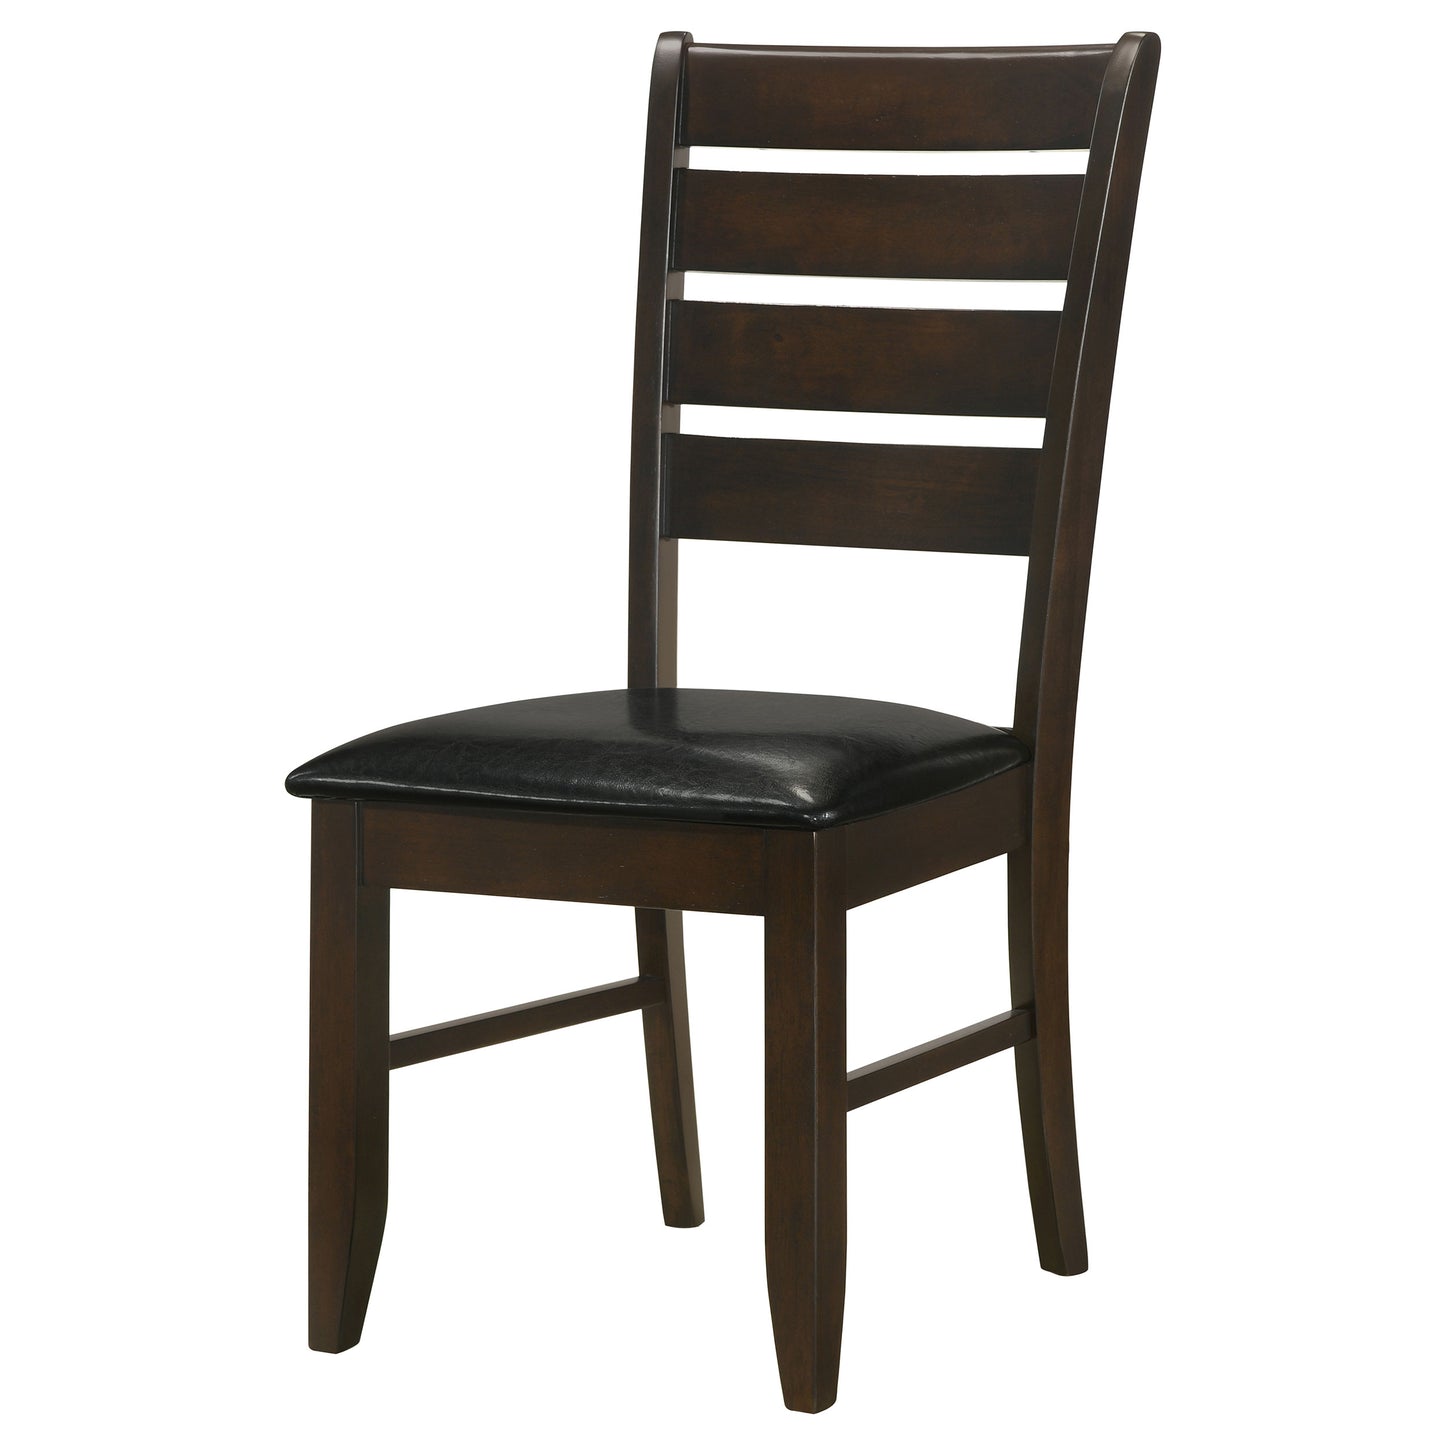 Dalila Ladder Back Side Chairs Cappuccino and Black (Set of 2)